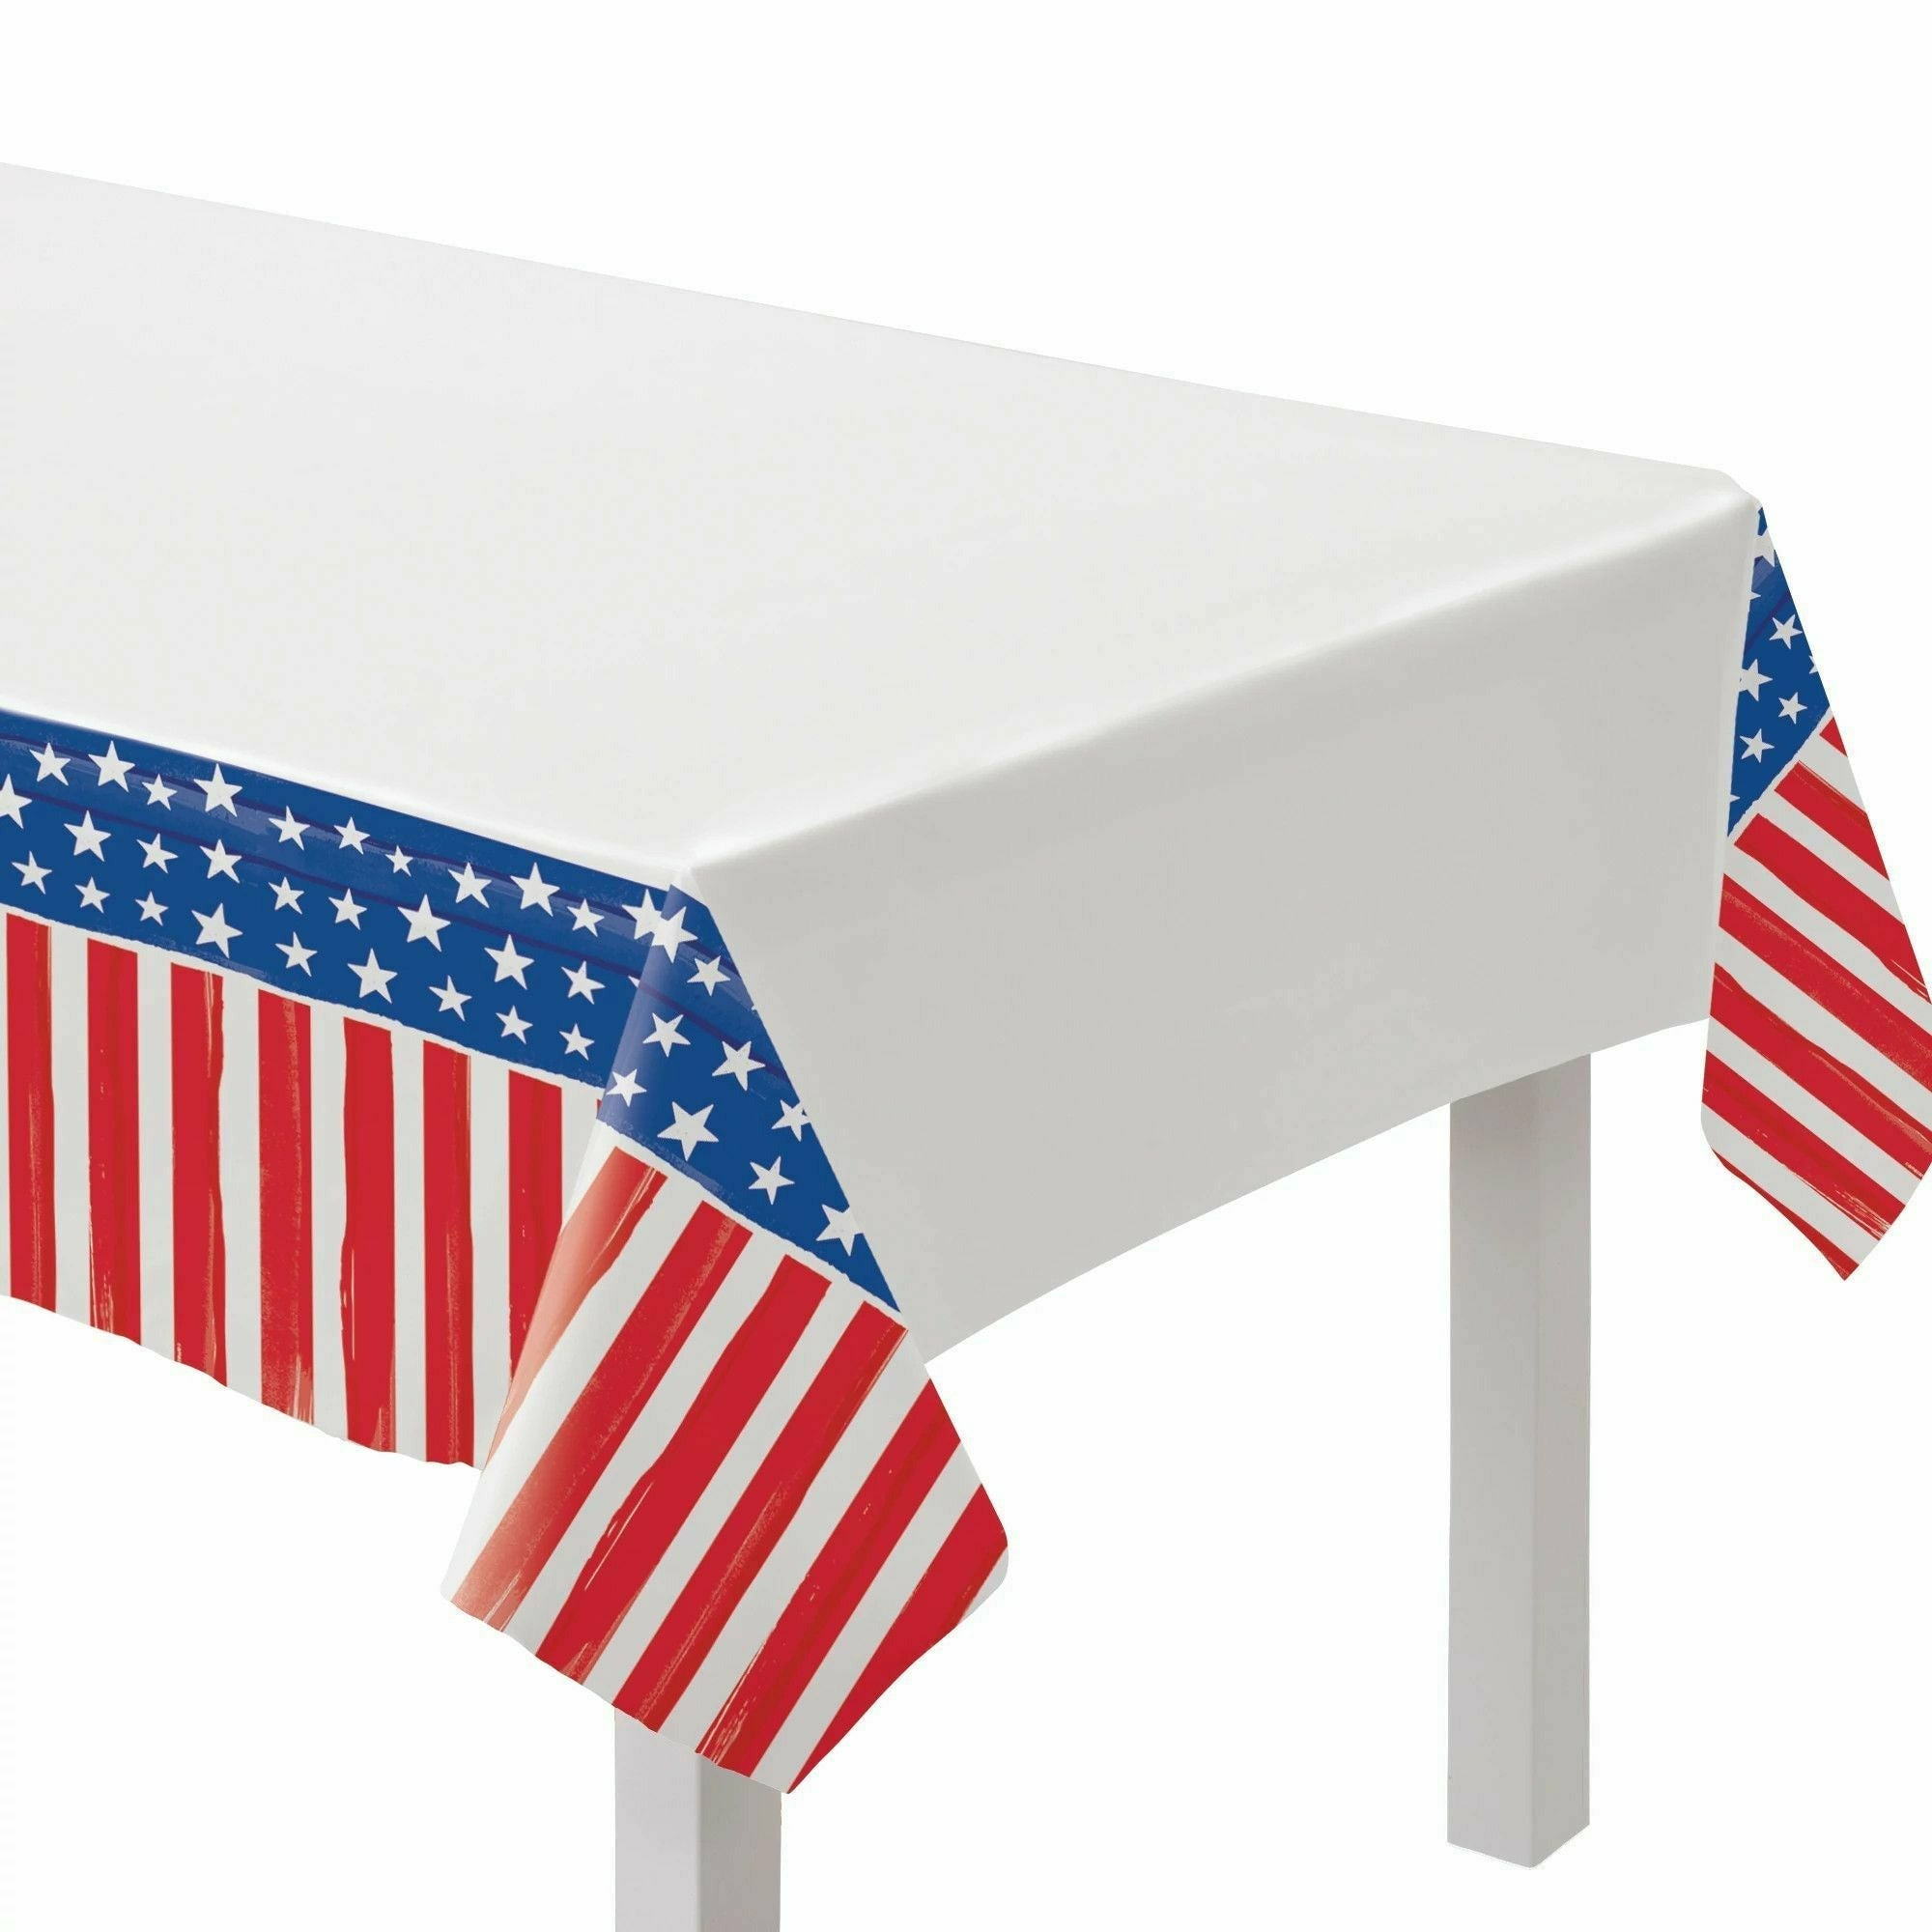 Amscan HOLIDAY: PATRIOTIC Painted Patriotic Plastic Table Cover